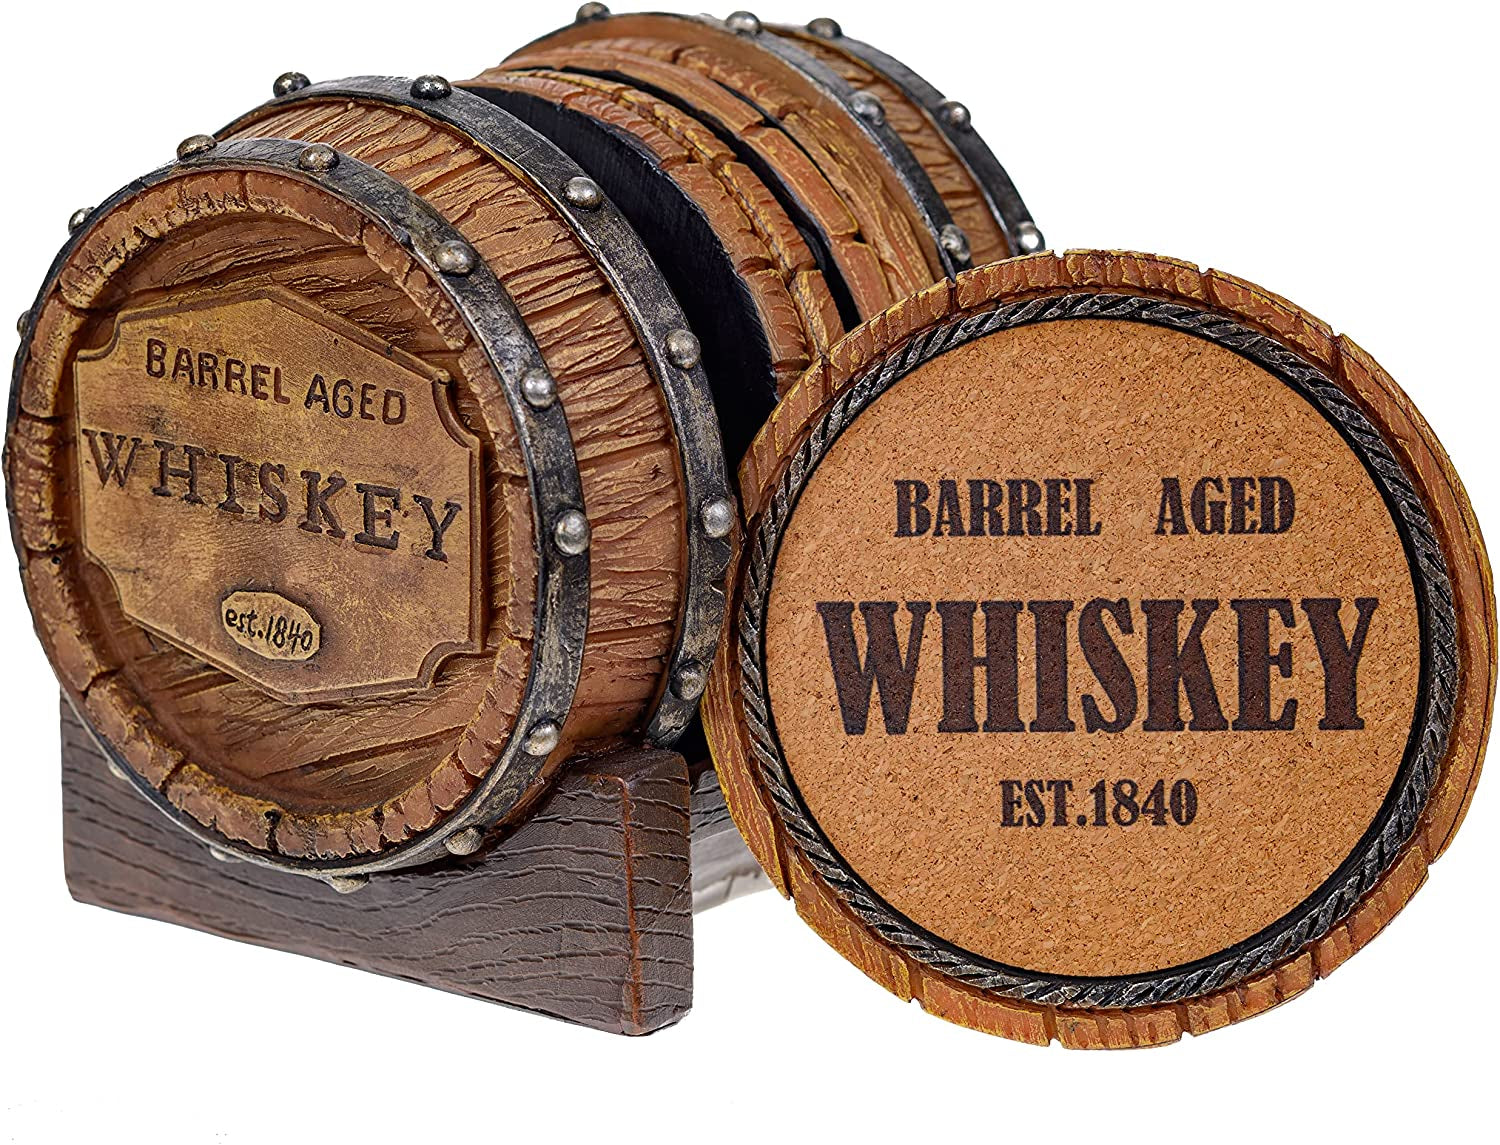 5Pc Whiskey Bourbon Barrel Drink Coasters, Unique Bar Decor & Accessories, Beer & Whiskey Glass Coaster - Home Decorations for Dining Room or Home Bar - Modern Coaster Set with Holder for Man Cave